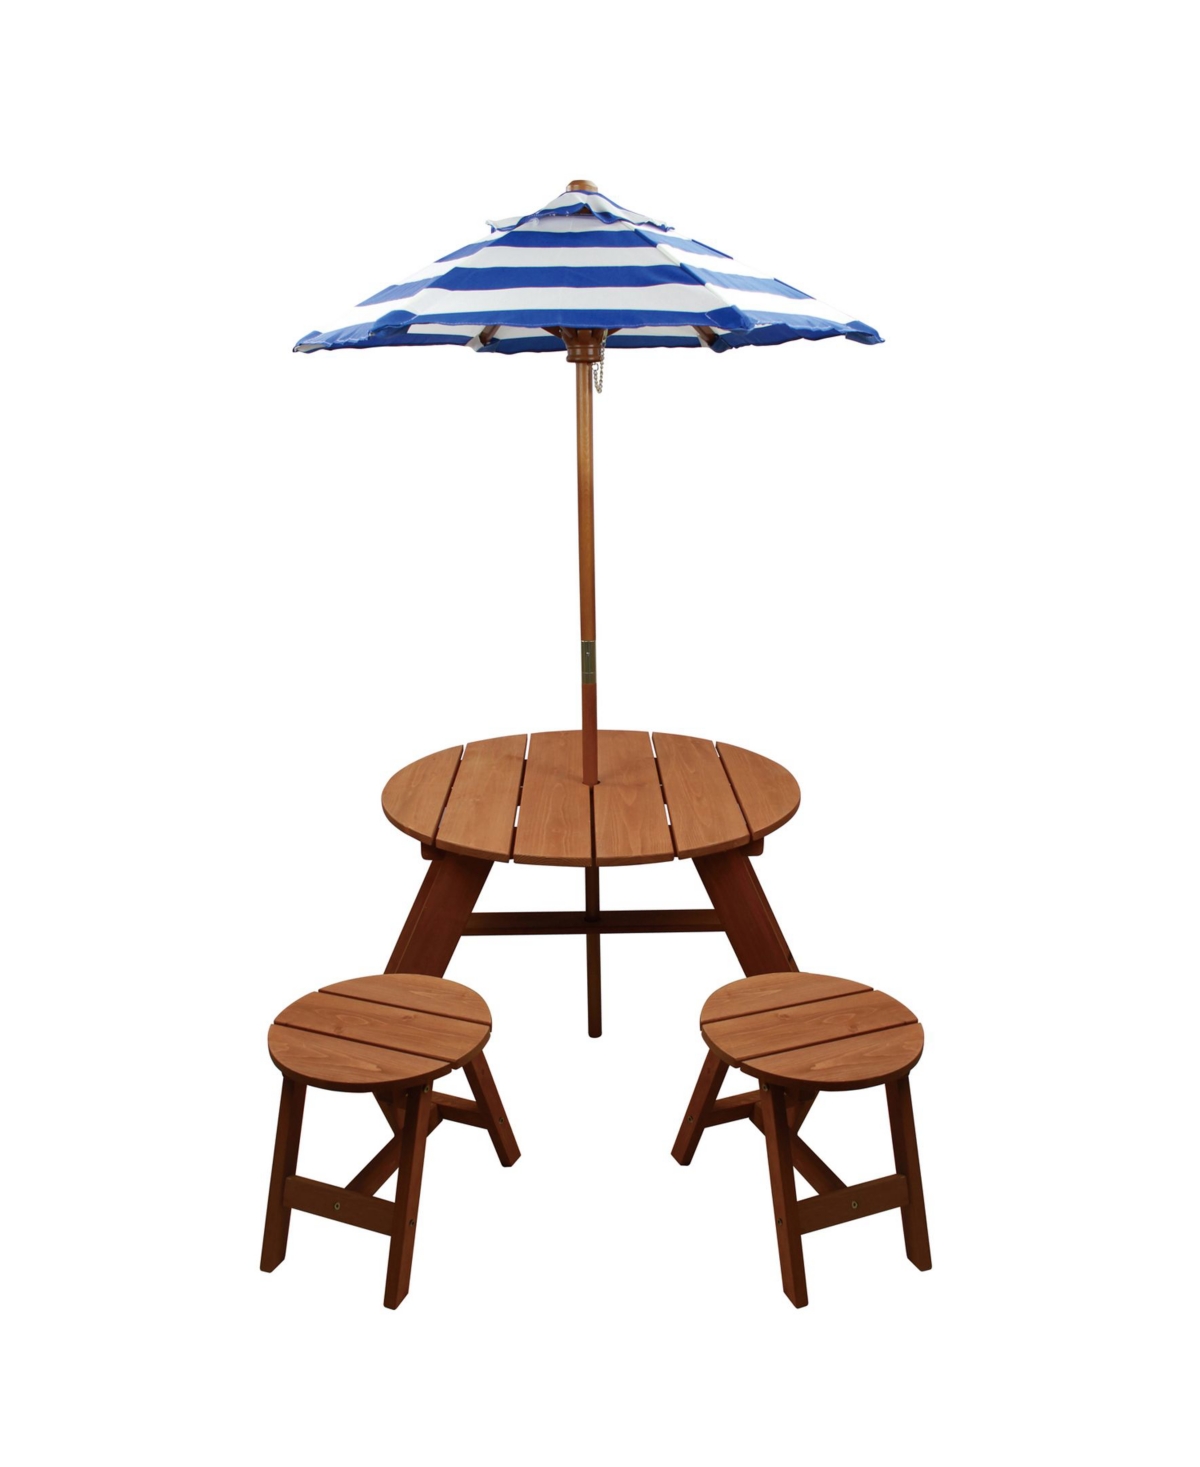 Homeware Kids' Round Table With Umbrella And Chairs, Set Of 4 In Brown